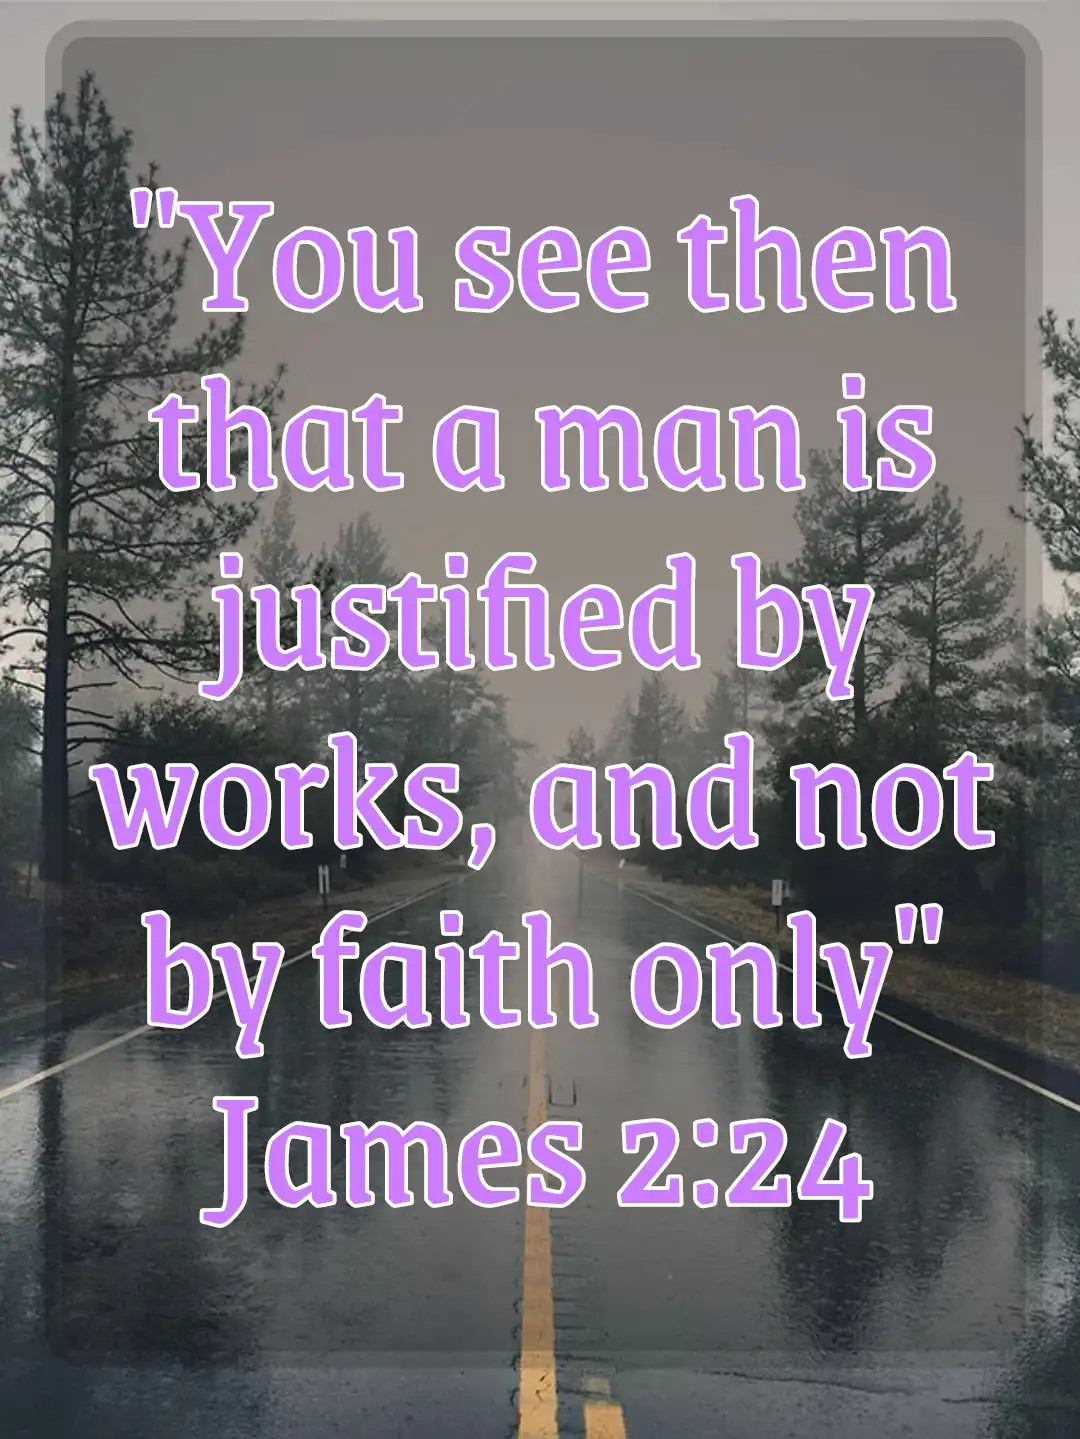 bible verses on faith and hope (James 2:24)